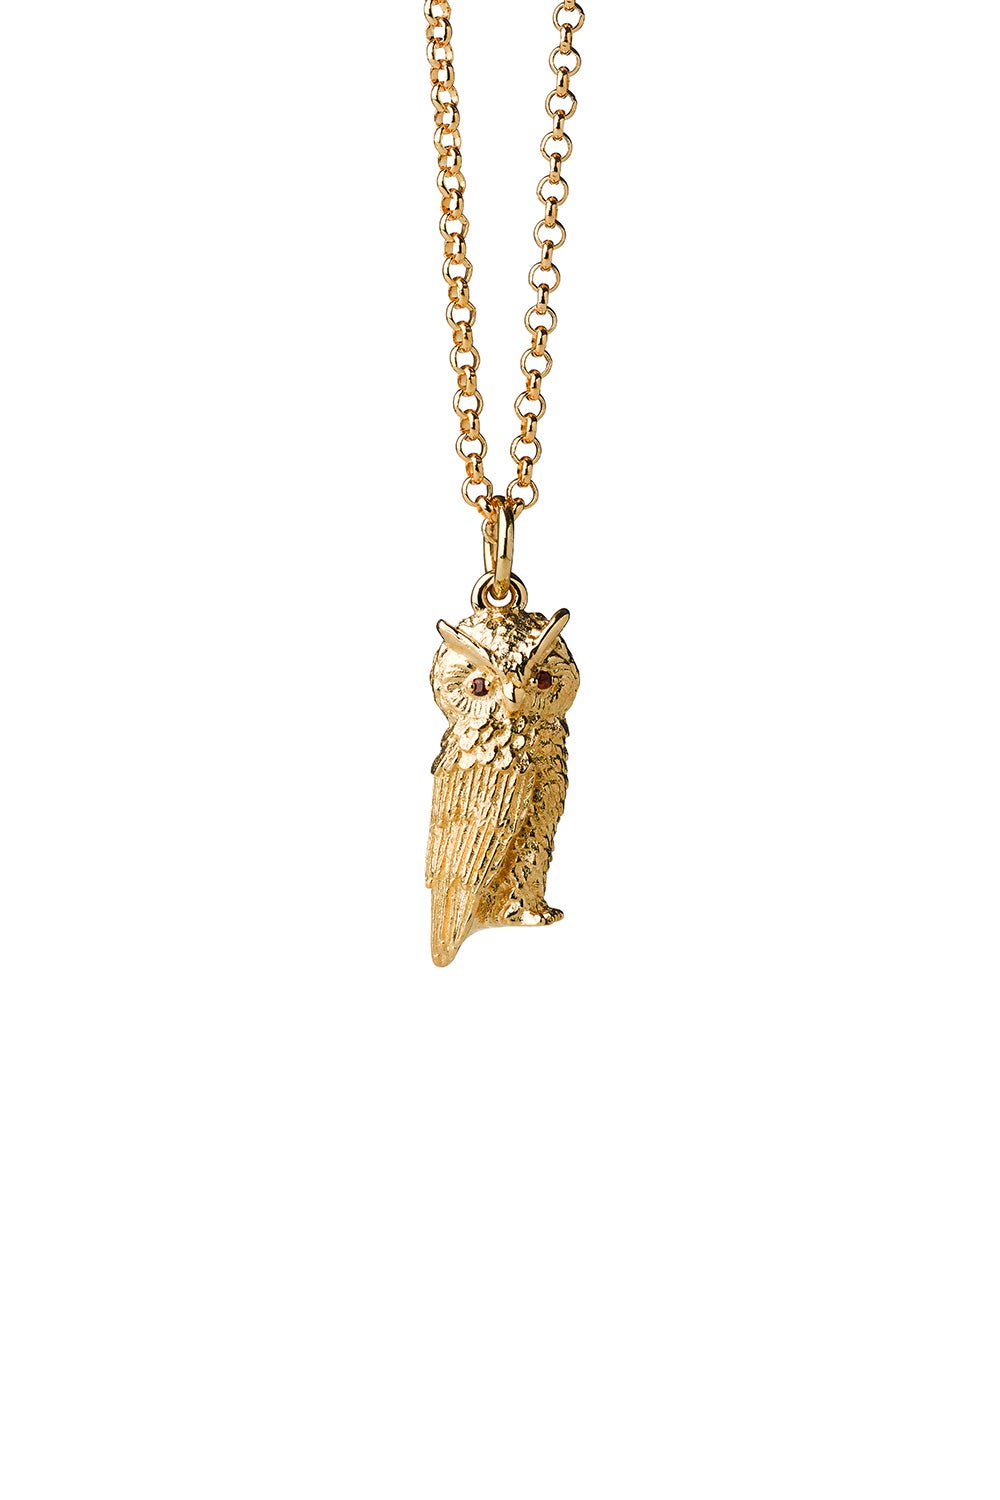 Owl Necklace Gold with Garnet